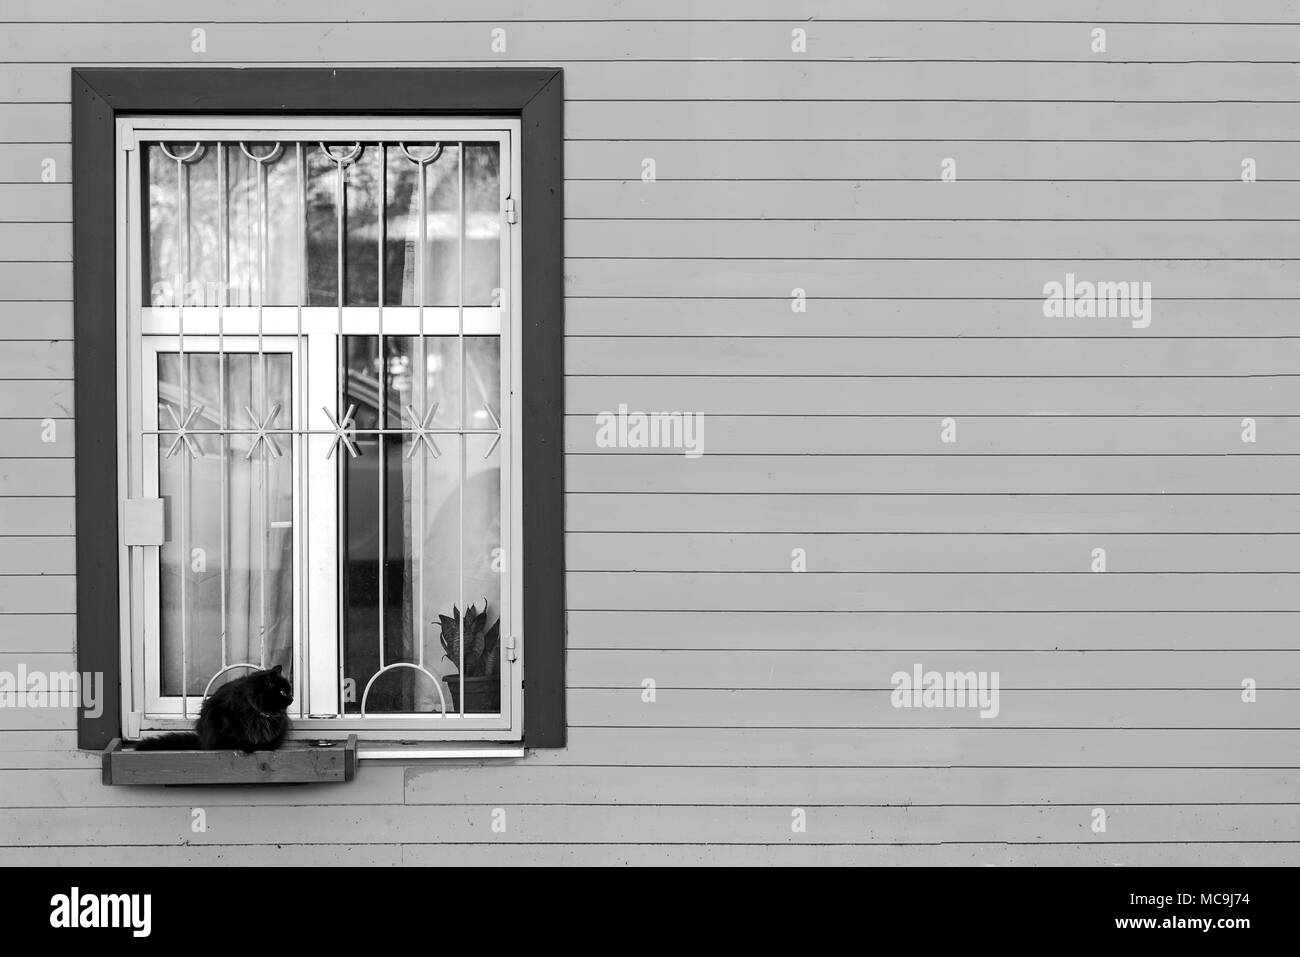 In the box at the home window the cat is sitting. Black and white photography. Stock Photo